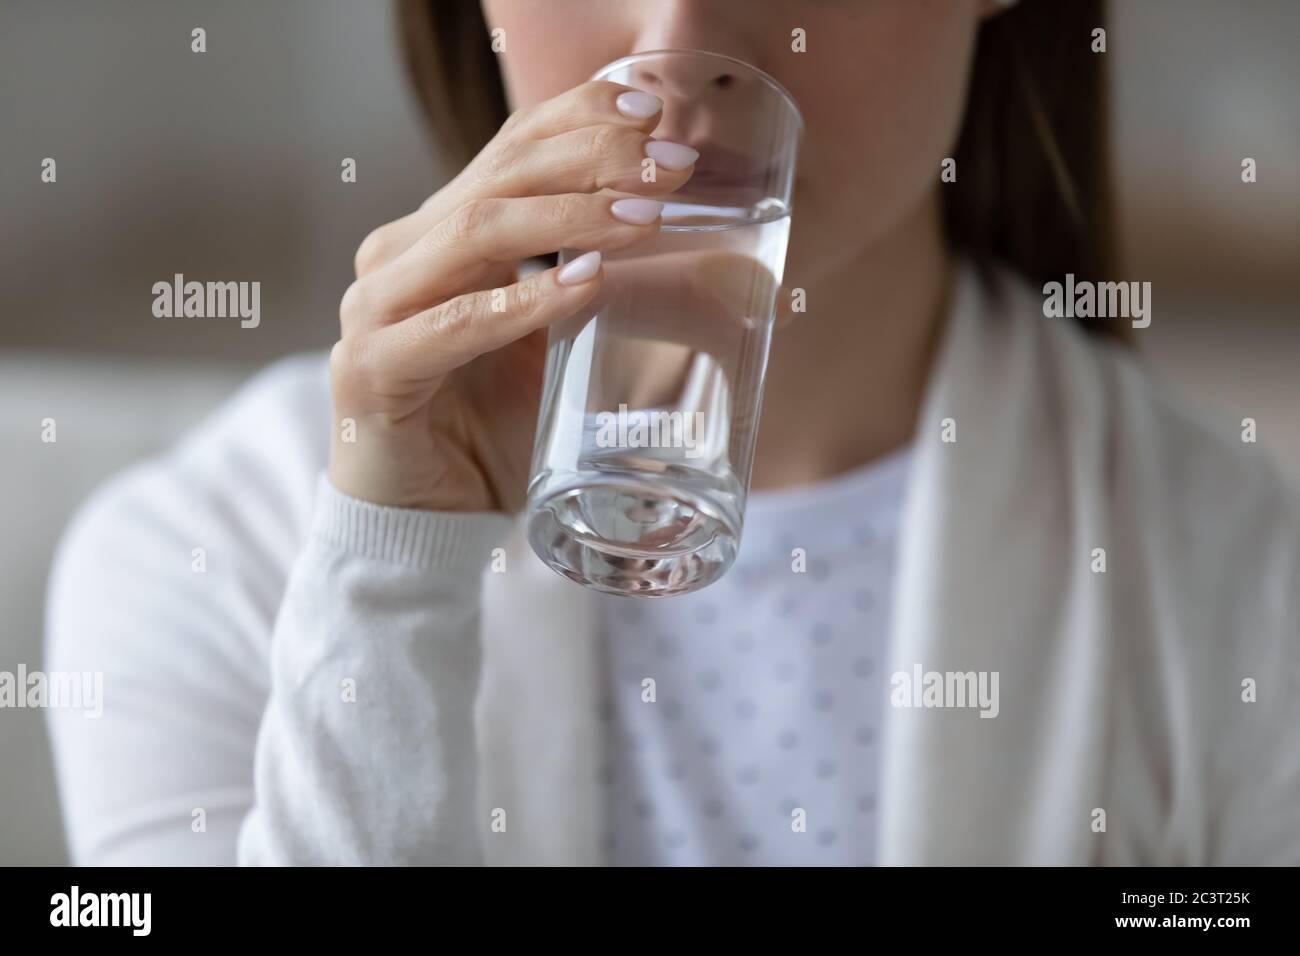 Woman drinking still or mineral water close up concept image Stock Photo